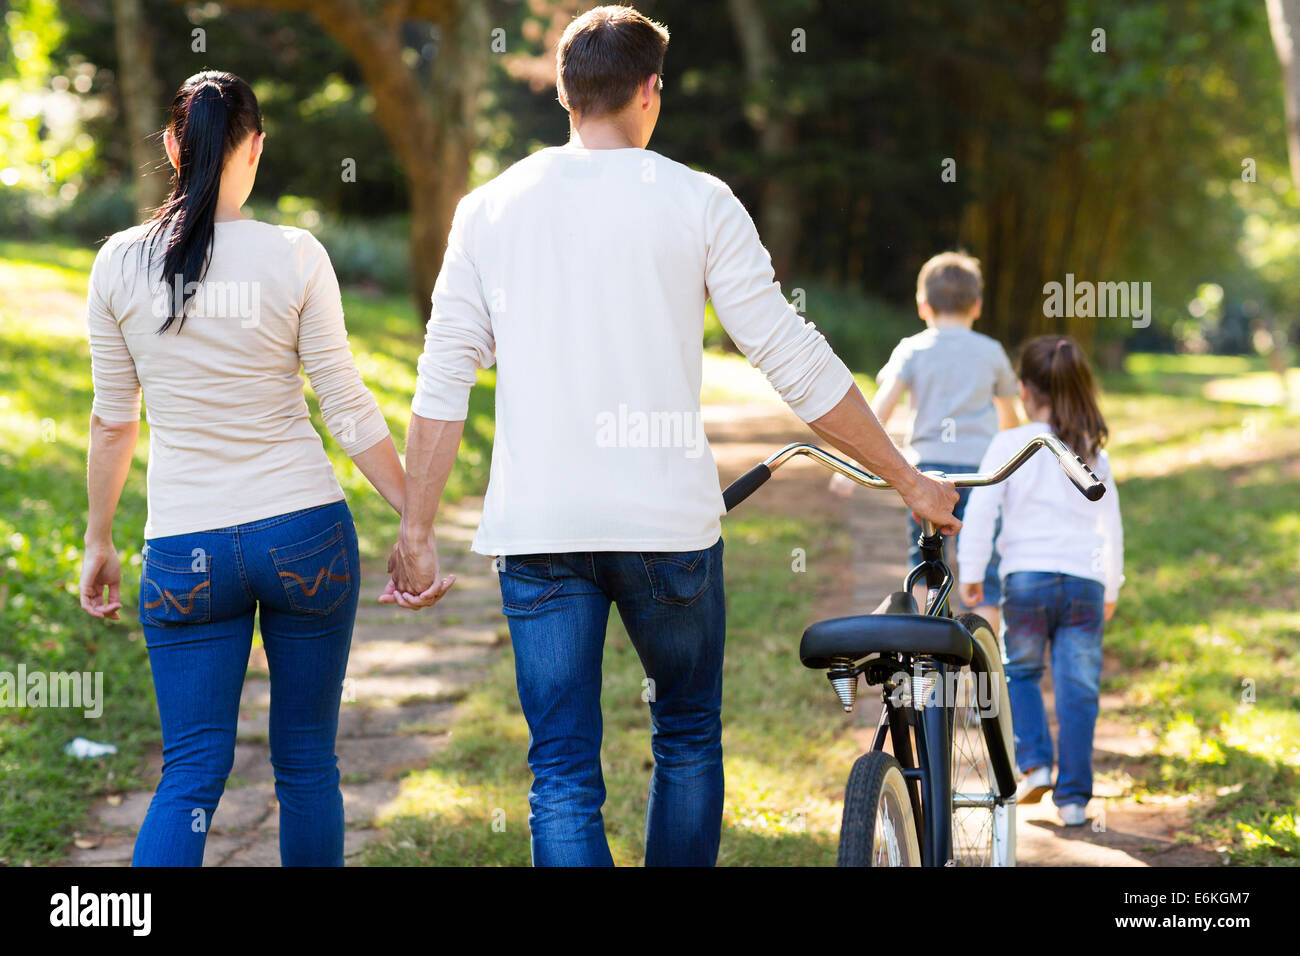 rear view of young family walking outdoors Stock Photo